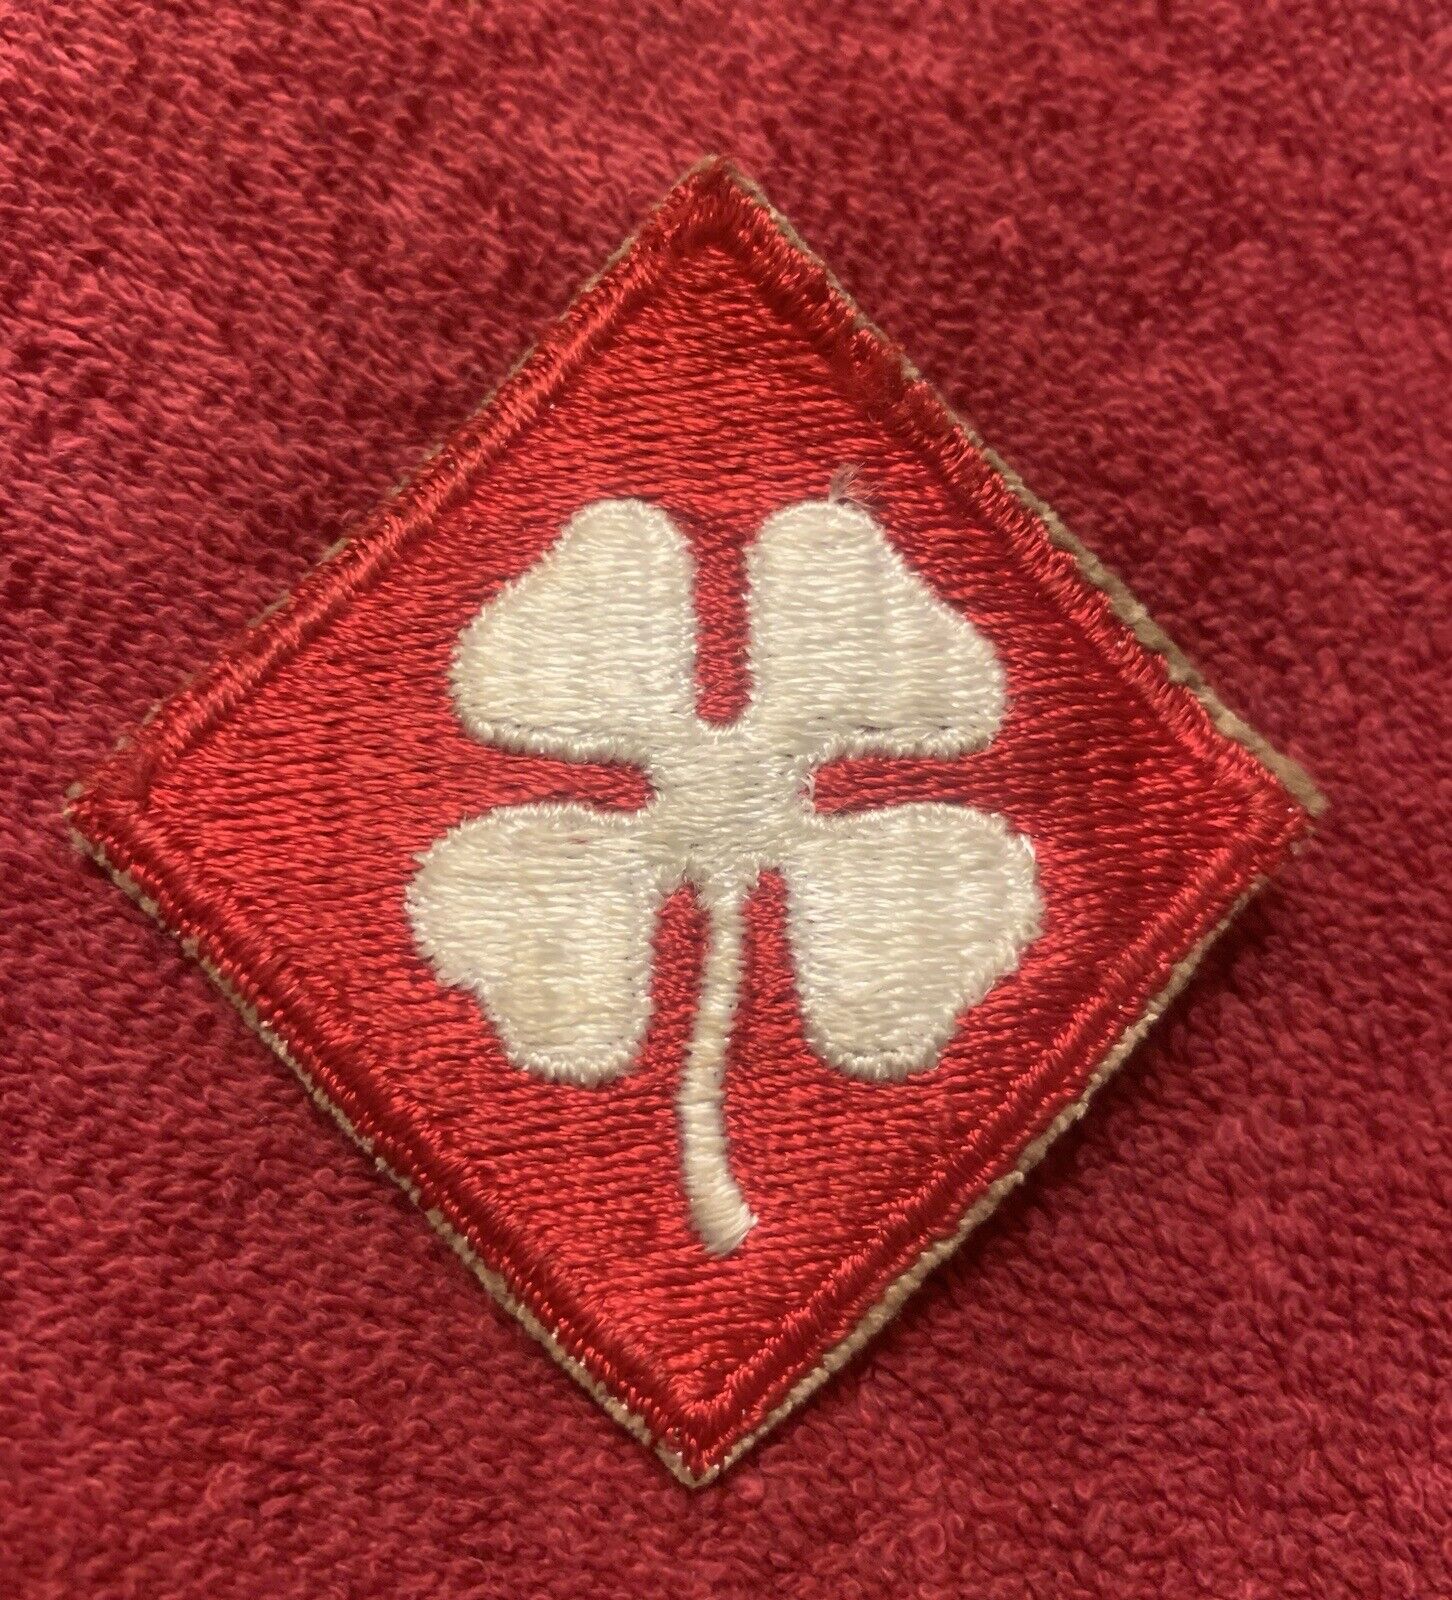 Vintage 4th Army White Four Leaf Clover Red Shoulder Sleeve Military Patch